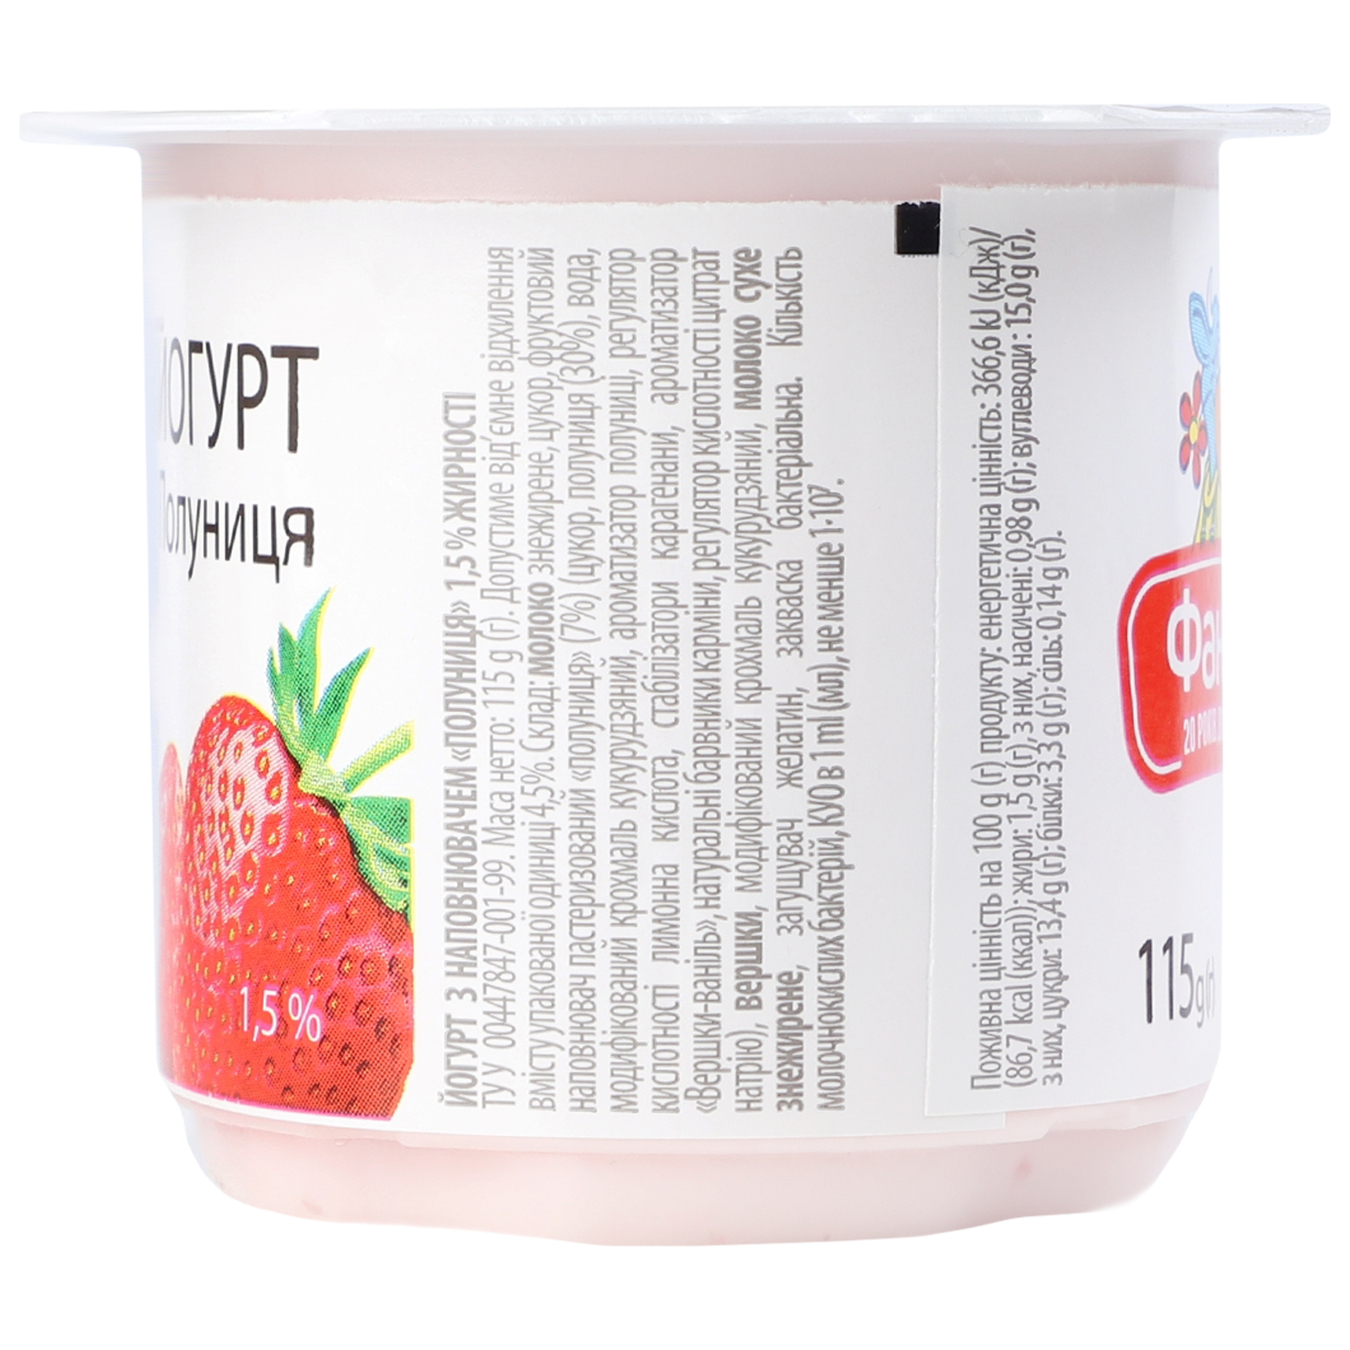 Fanny yogurt with strawberry filling cup 1.5% 115g 5